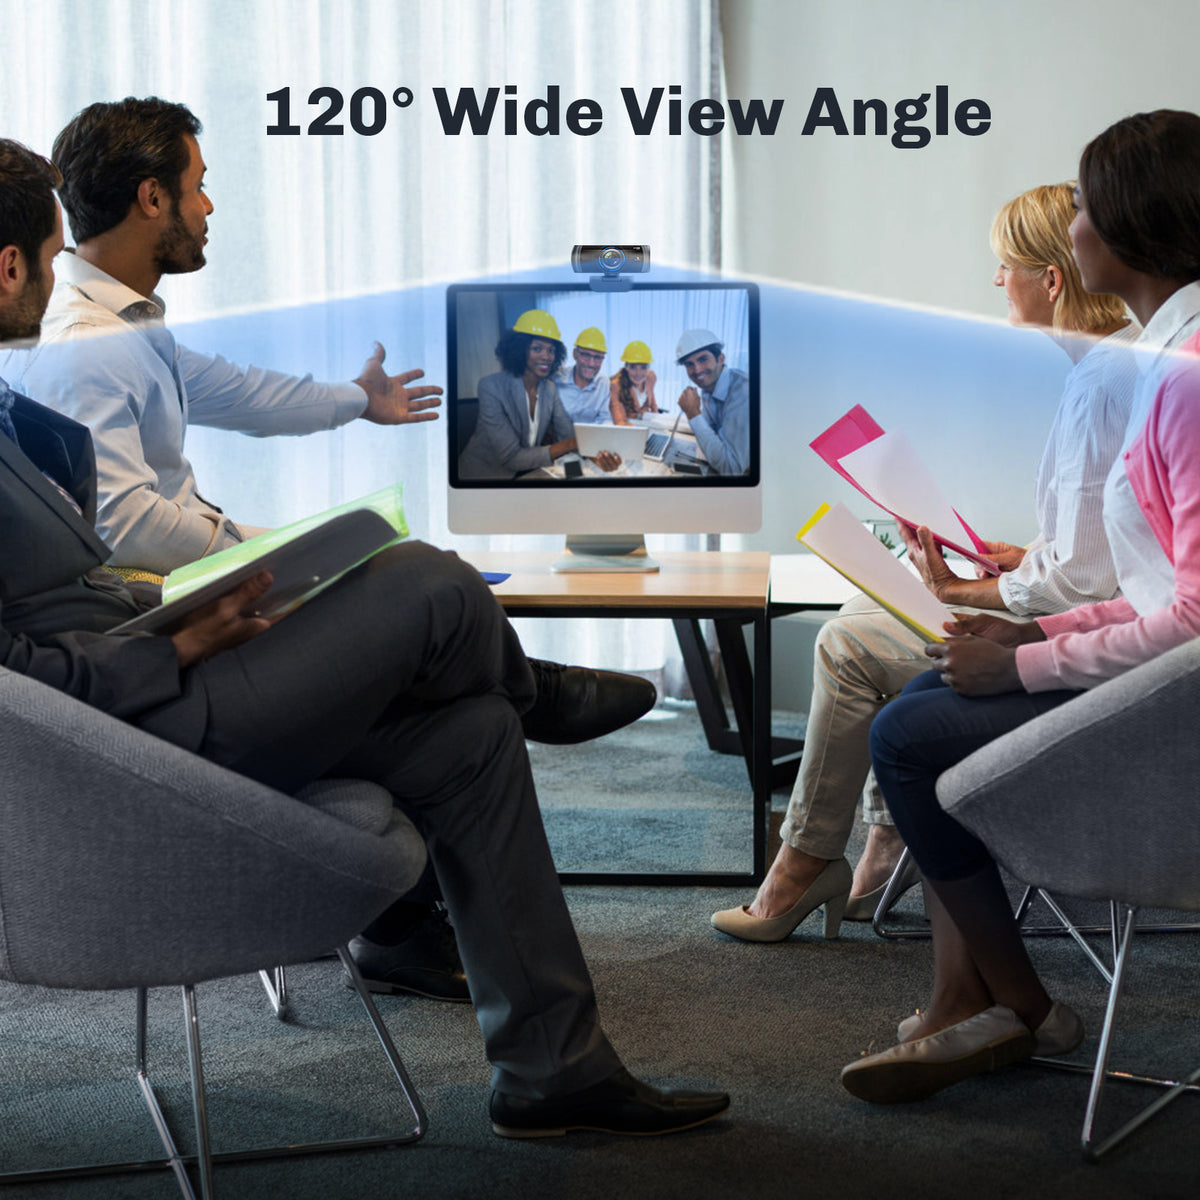 The camera has a 120° ultra-wide angle, capturing more people in a single frame